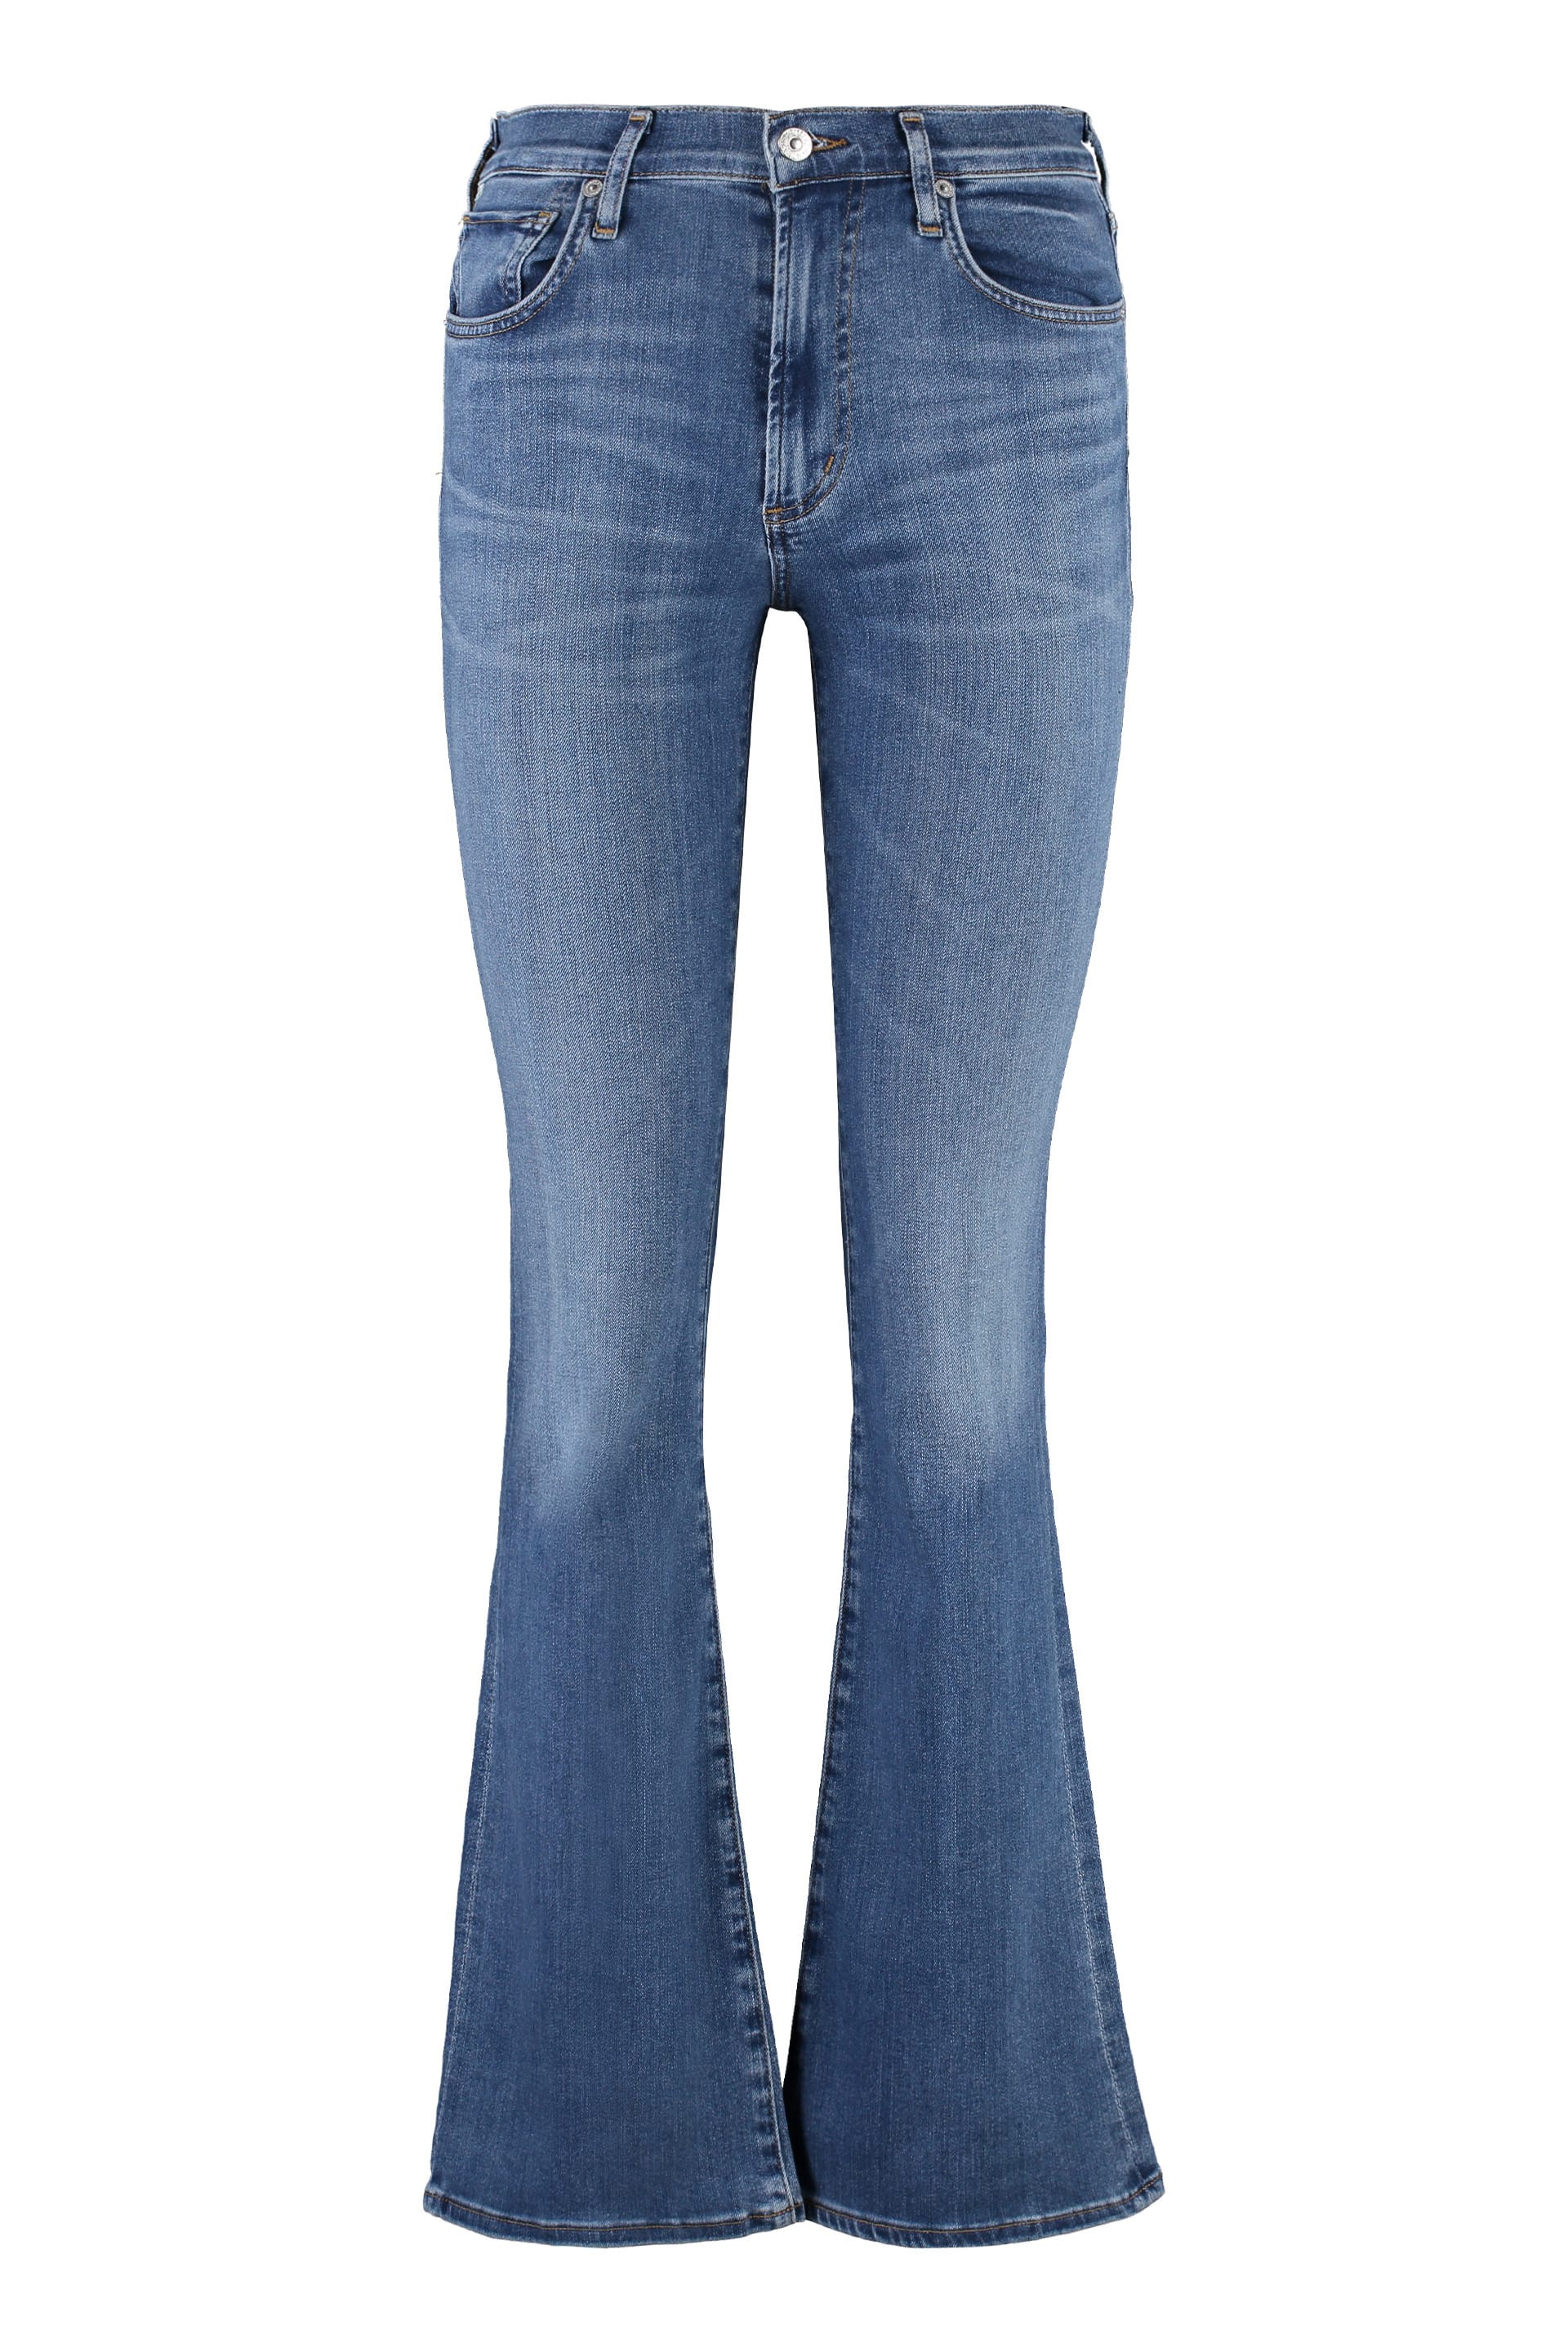 Citizens of Humanity Emannuelle Bootcut Jeans | italist, ALWAYS